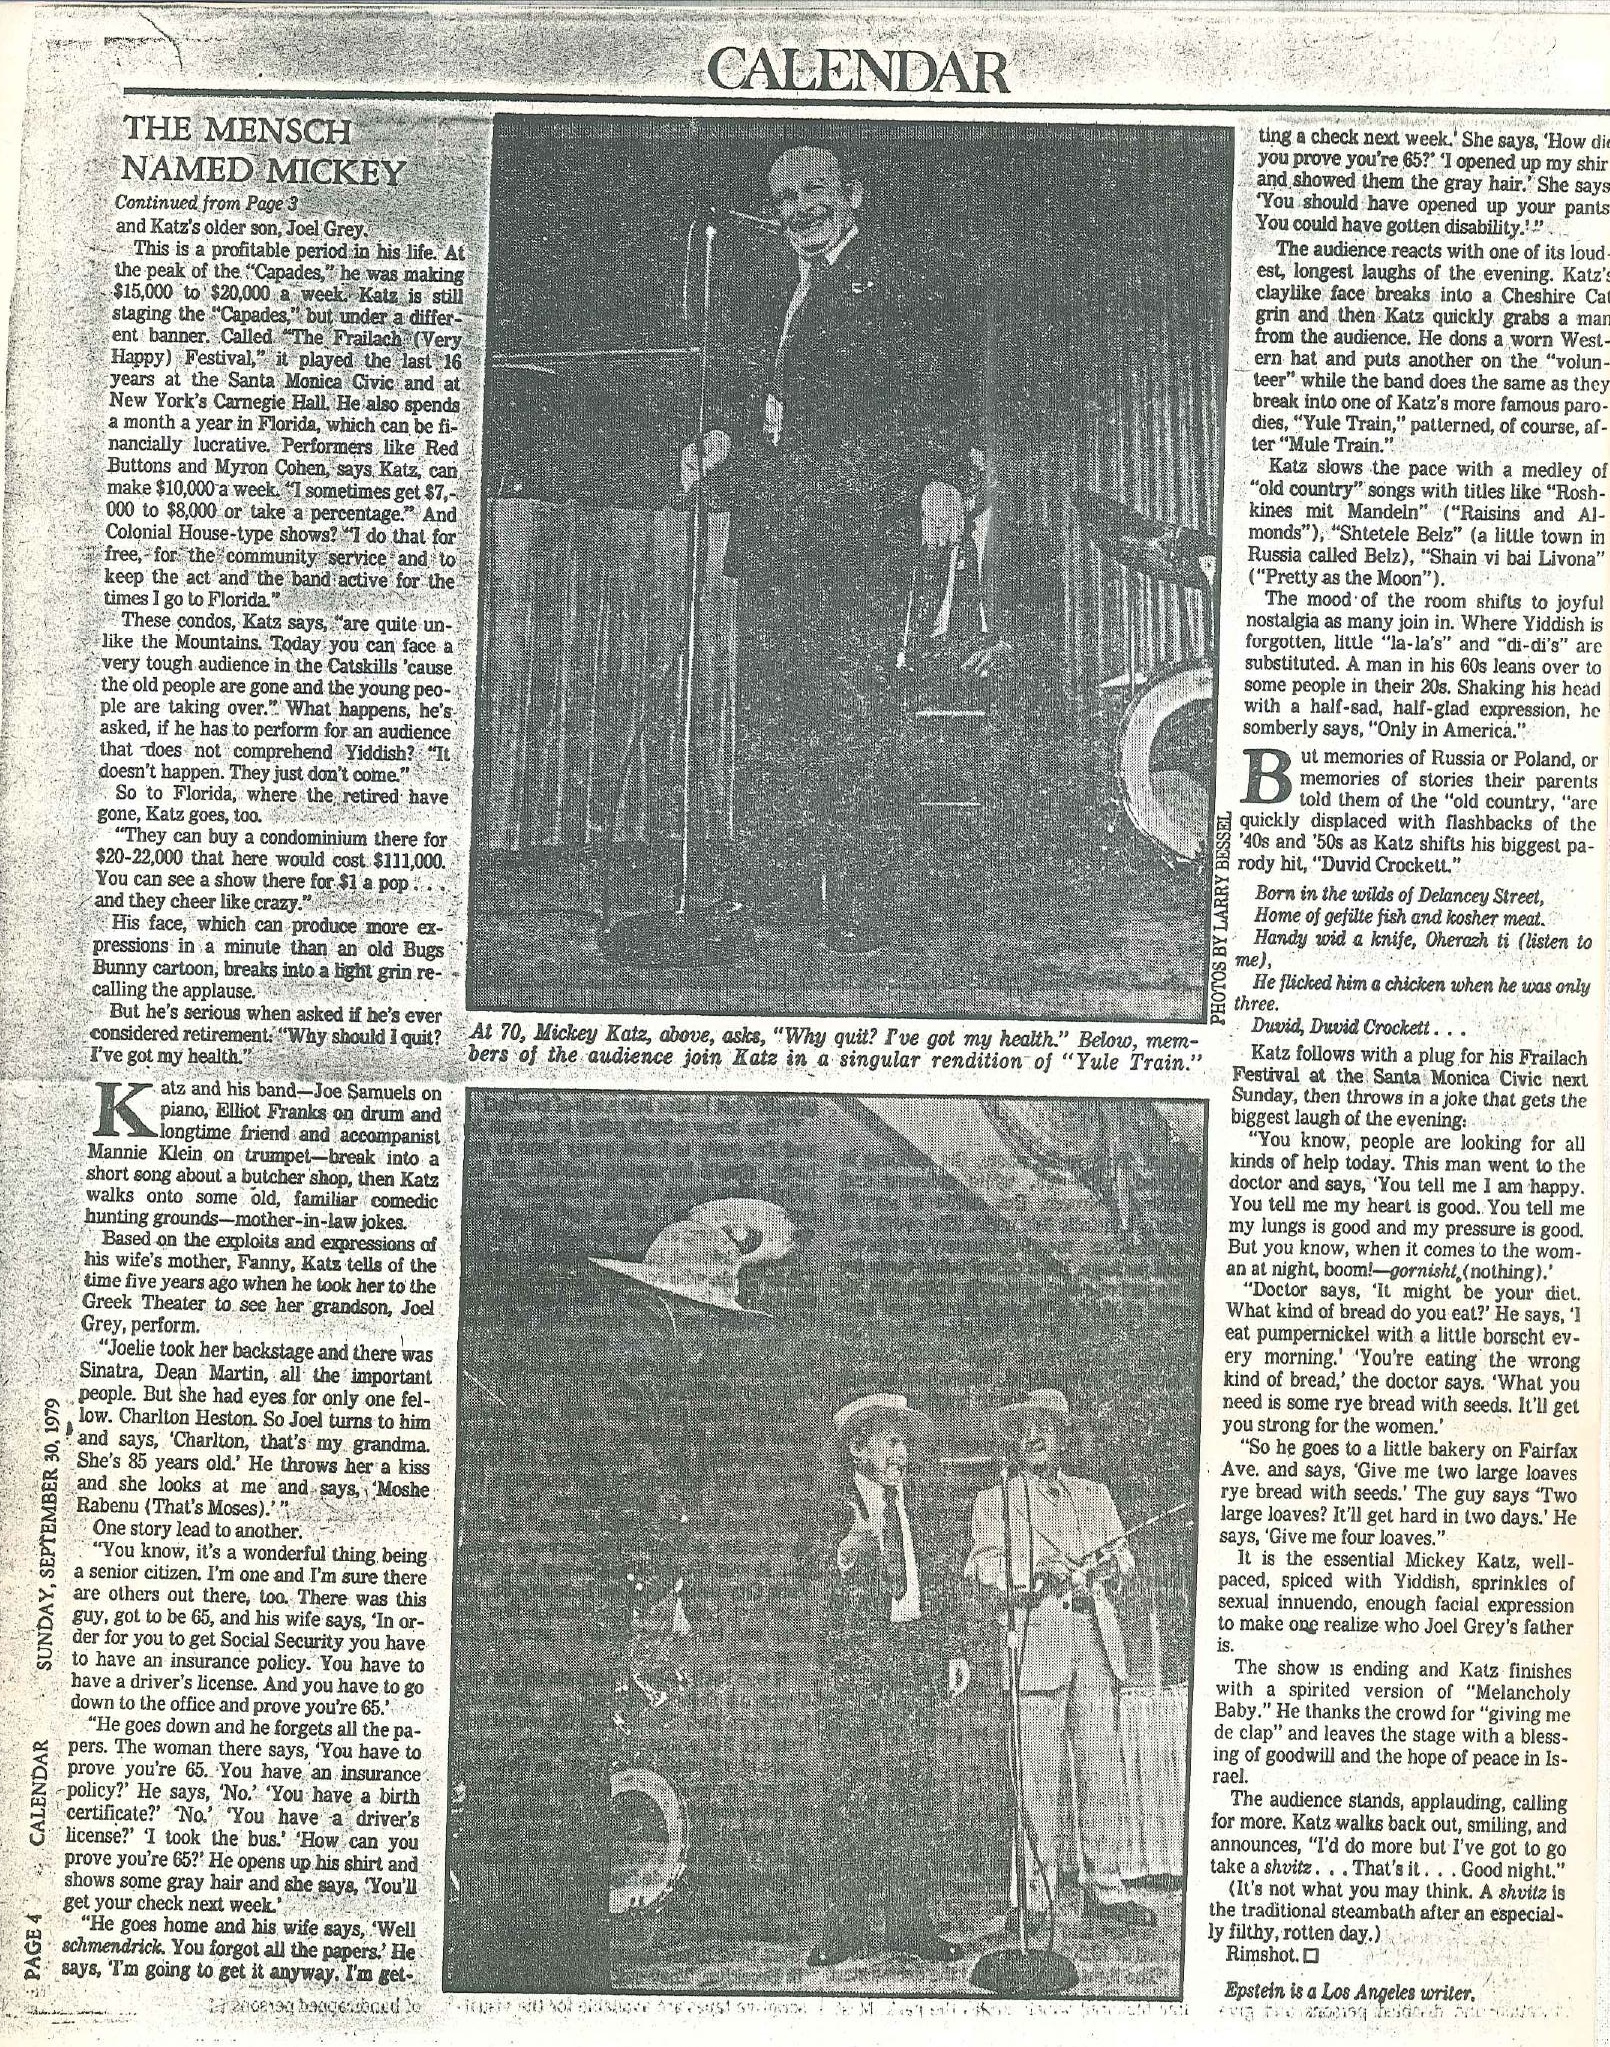 0023NC_Alternate copy of NC11_Clippings